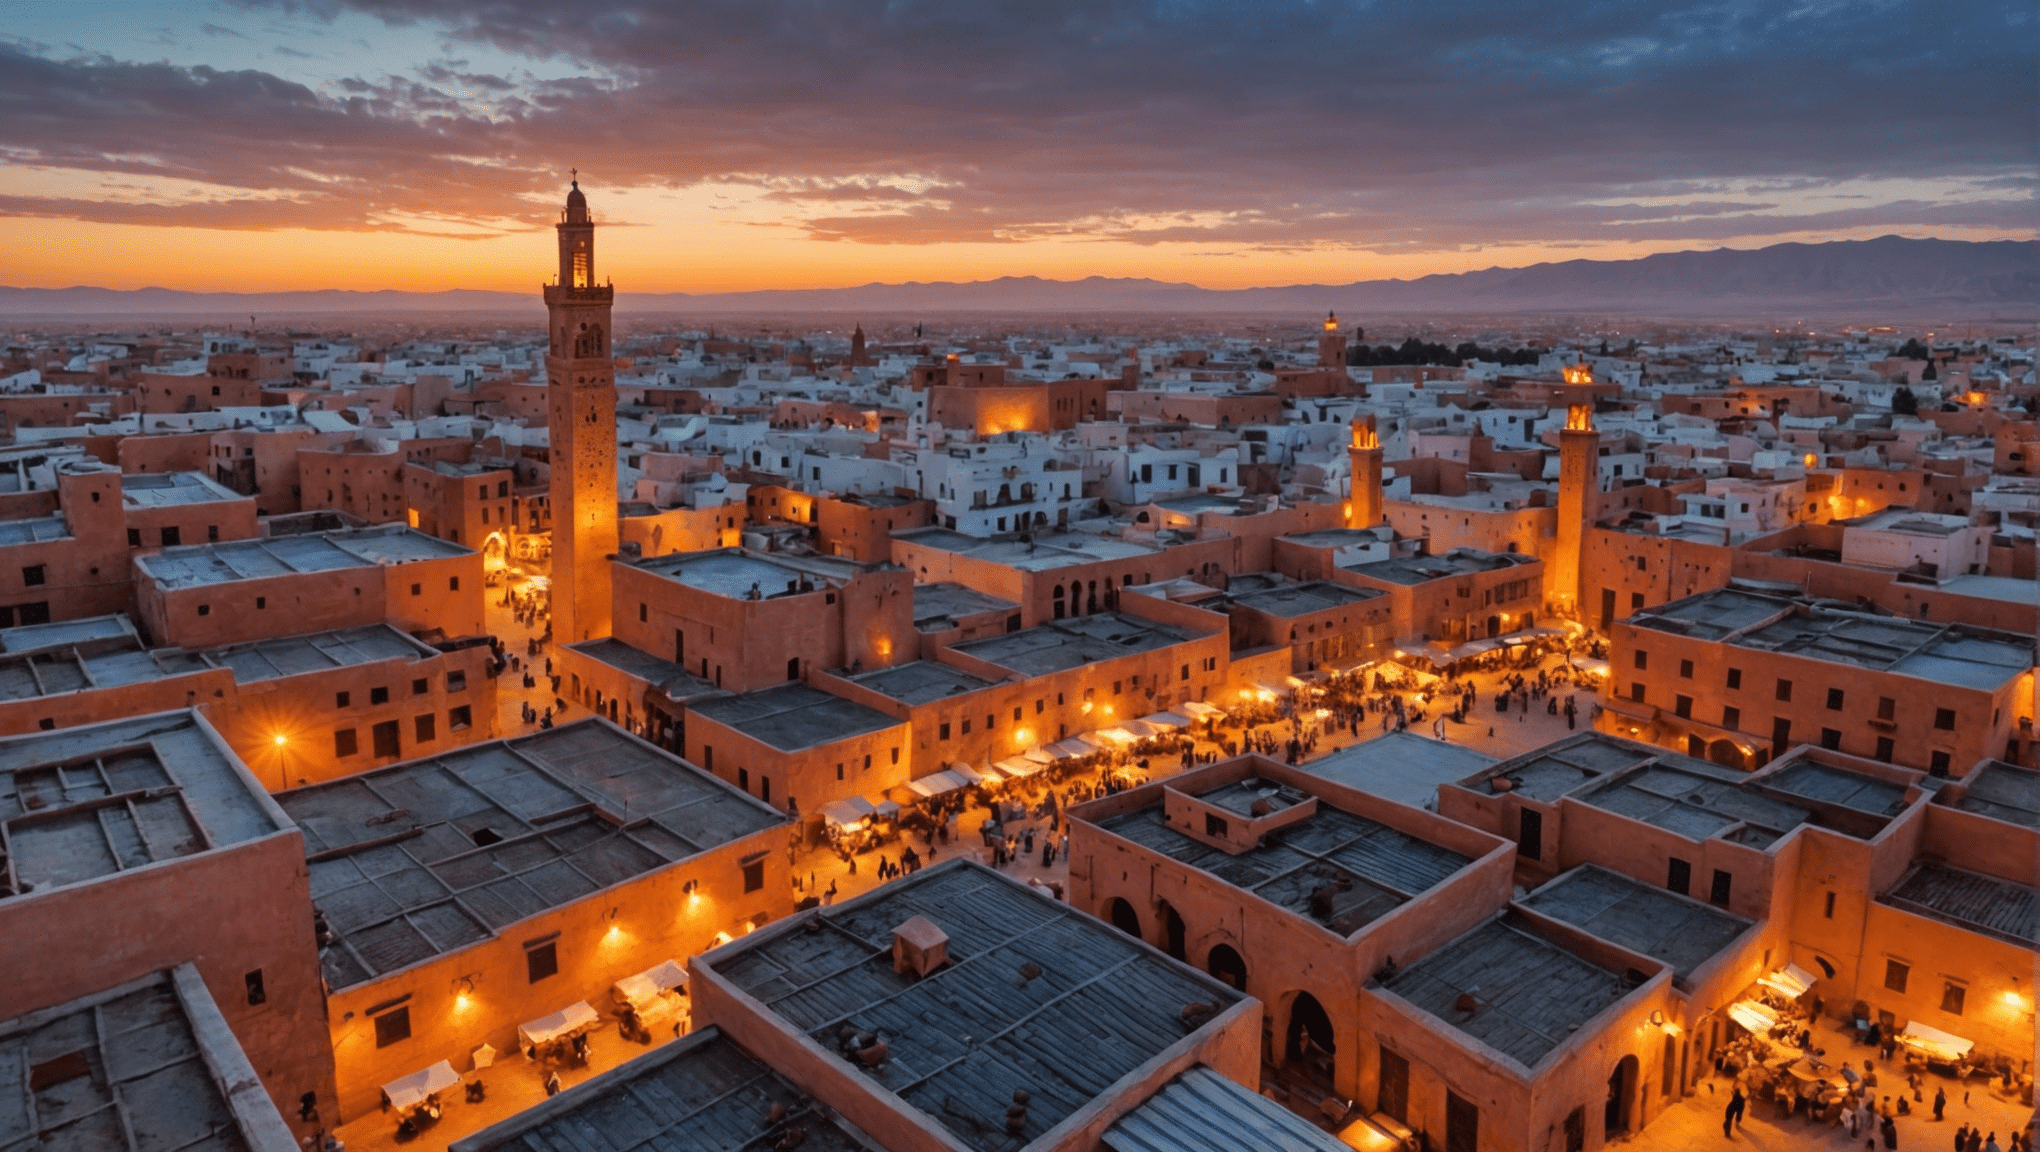 discover the weather conditions in morocco in january and plan your trip with confidence. find out about temperature, precipitation, and more to make the most of your visit.